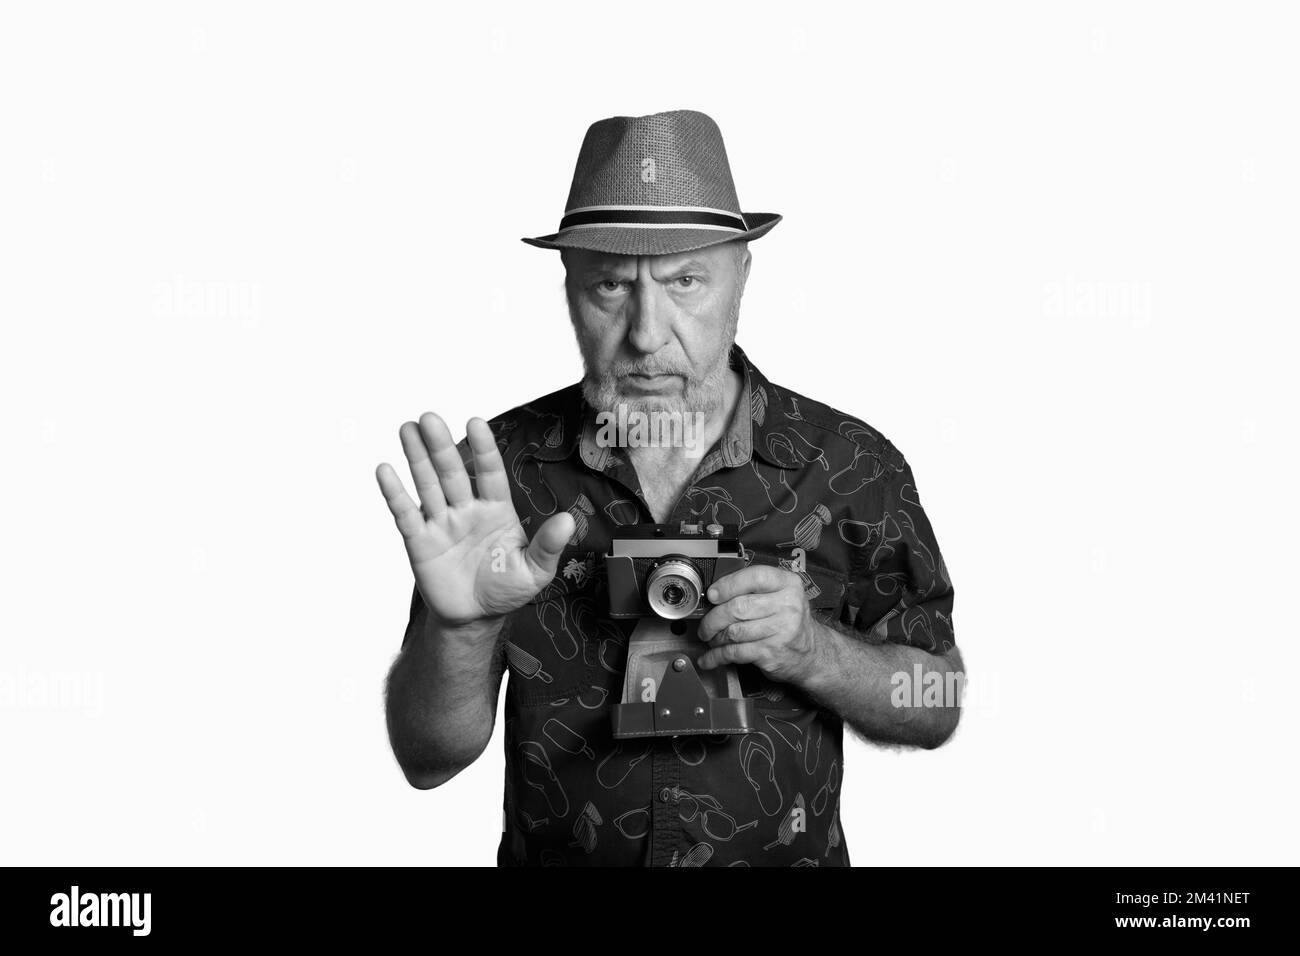 Attention I take pictures. Photographer from the past. Vintage black and white photo Stock Photo